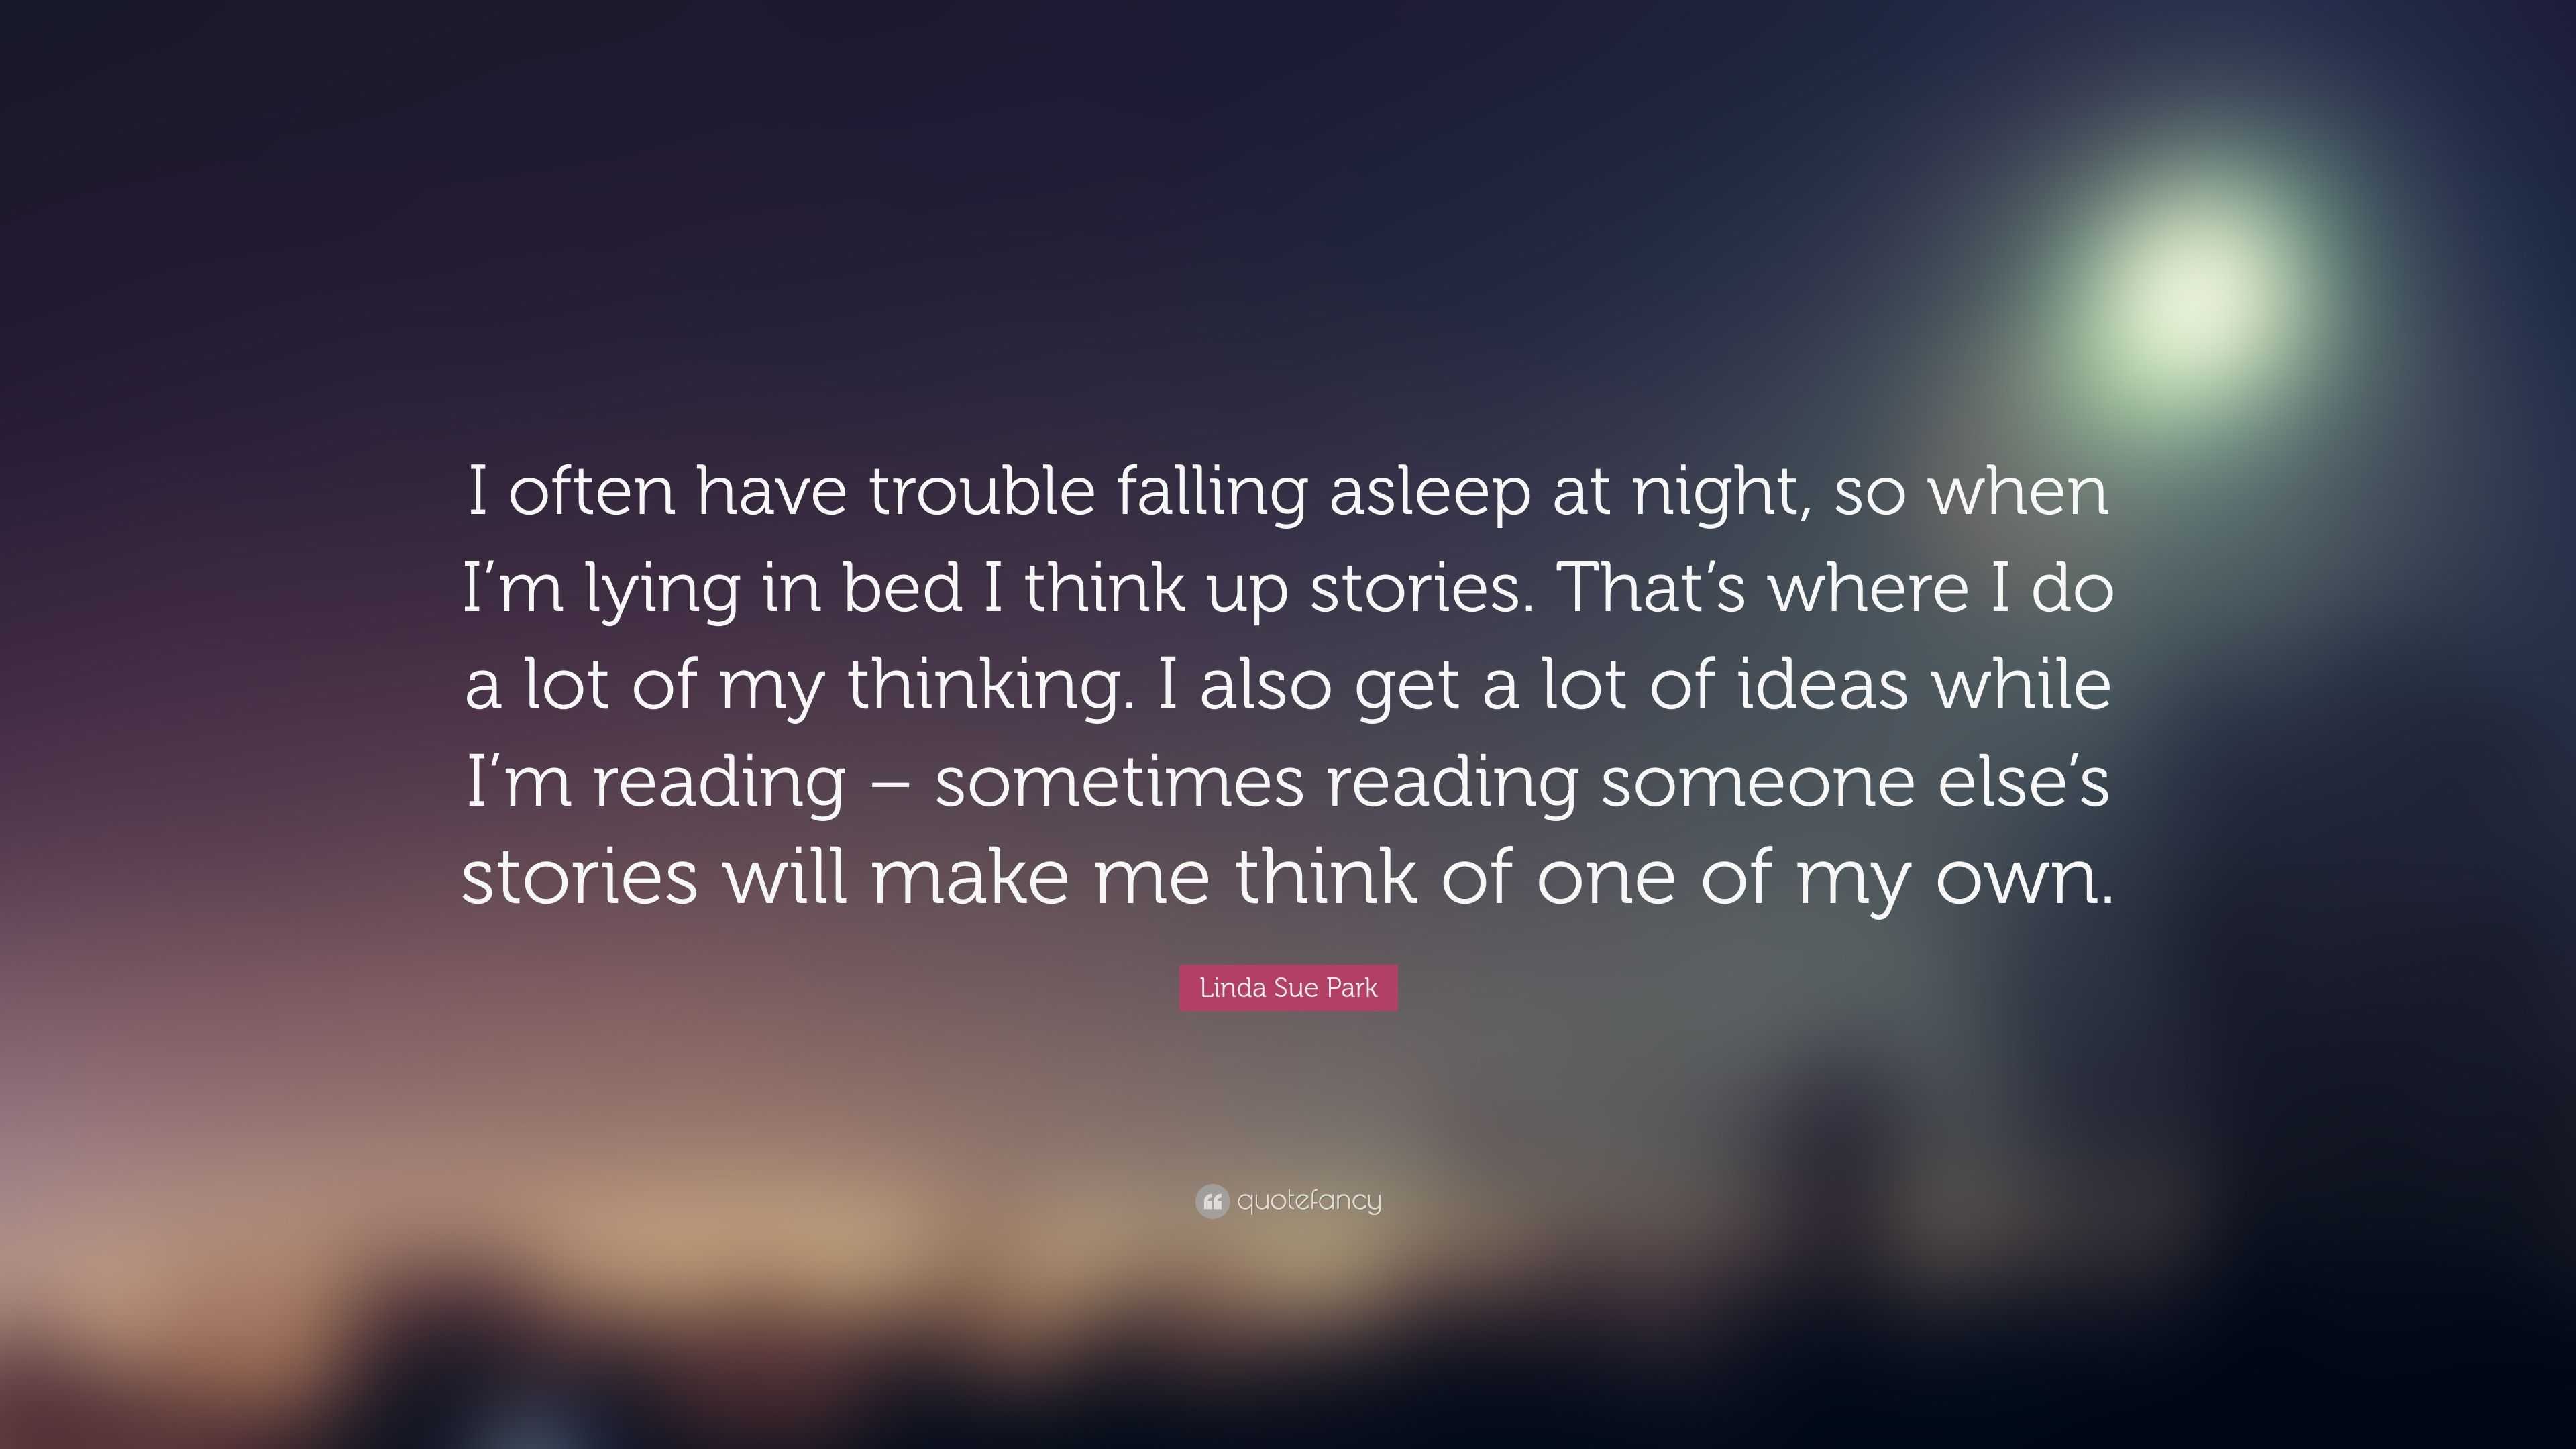 5146375 Linda Sue Park Quote I often have trouble falling asleep at night